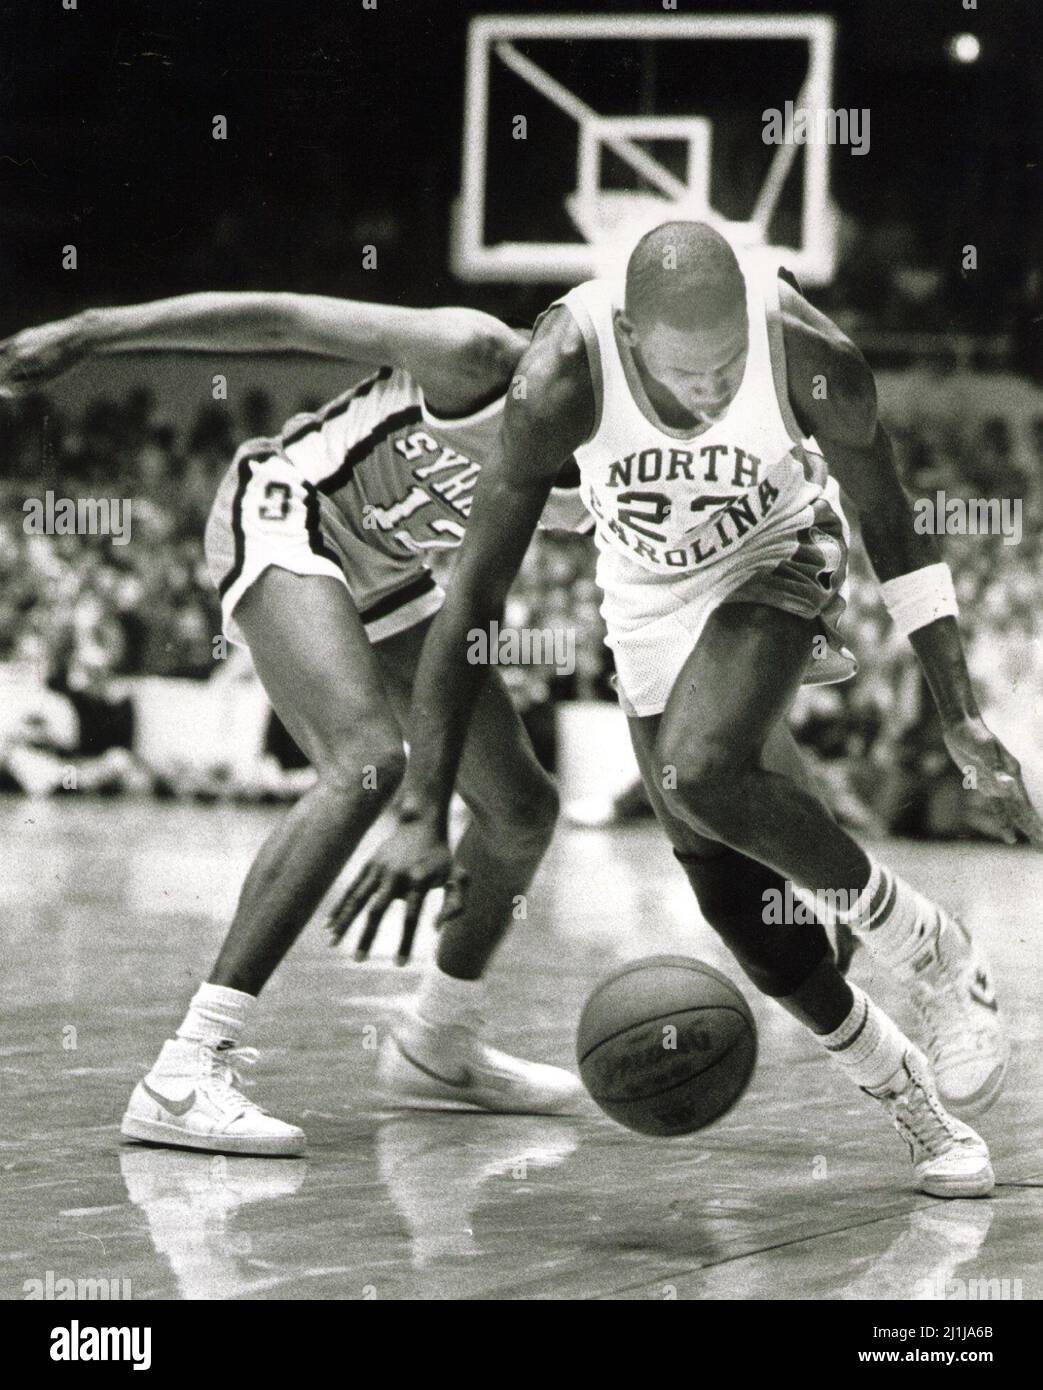 In a February 1983 file image, North Carolinas Michael Jordan, right, chases after a loose ball during a game against Syracuse